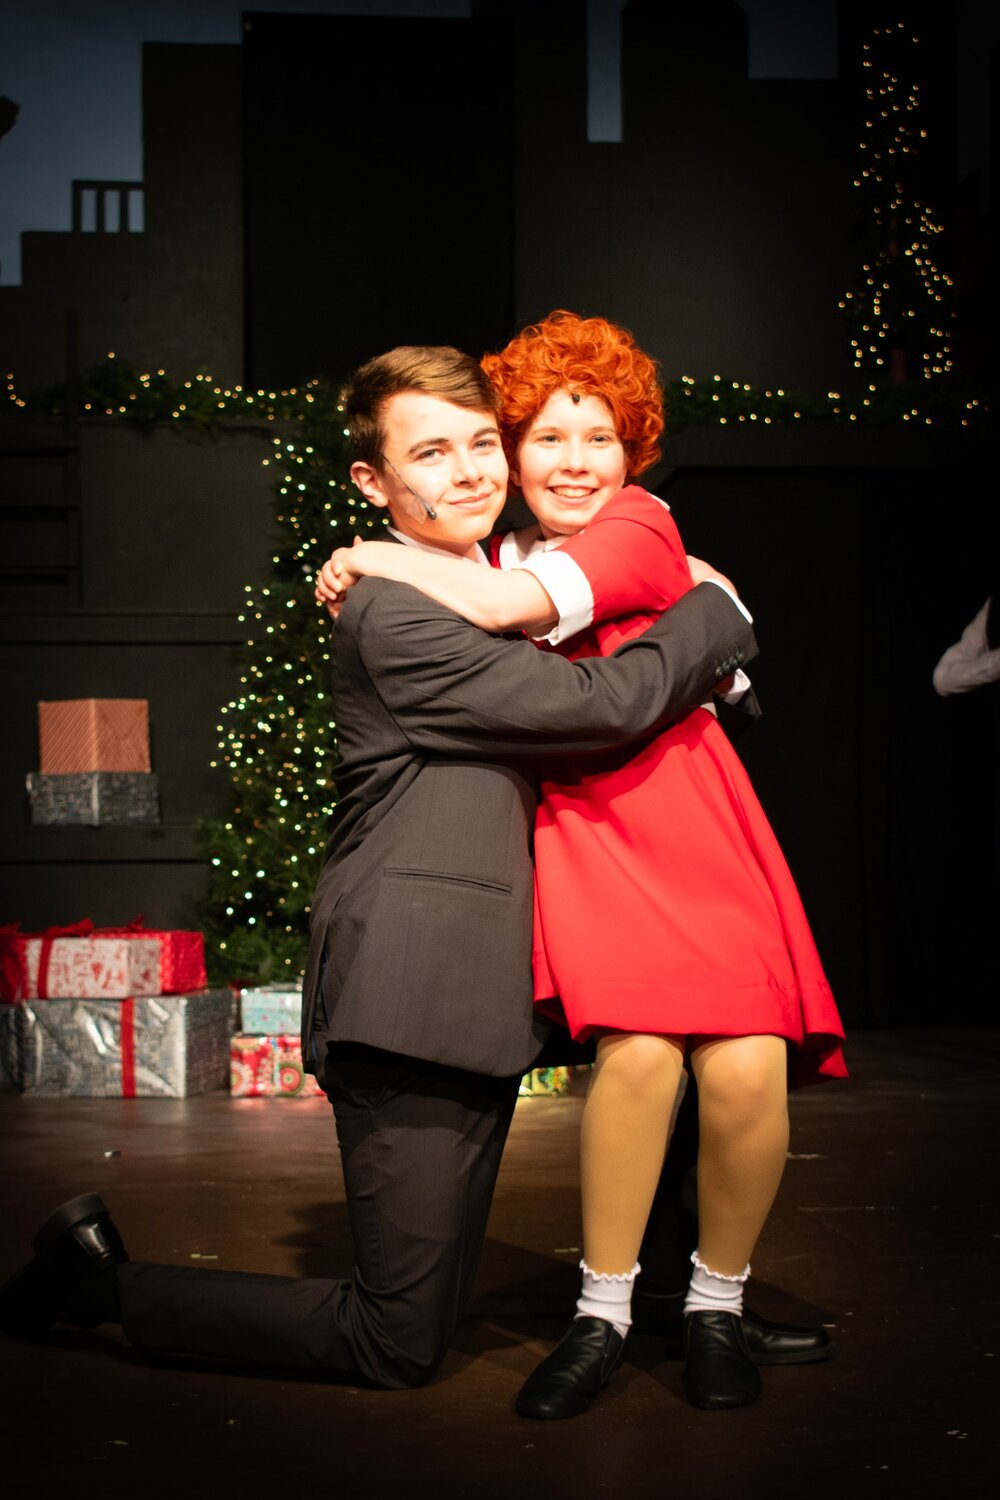 Ben Oppy (Oliver Warbucks) and Haleigh King (Annie) rehearse a scene for the upcoming production of Annie Jr. at the Vanity Theater.